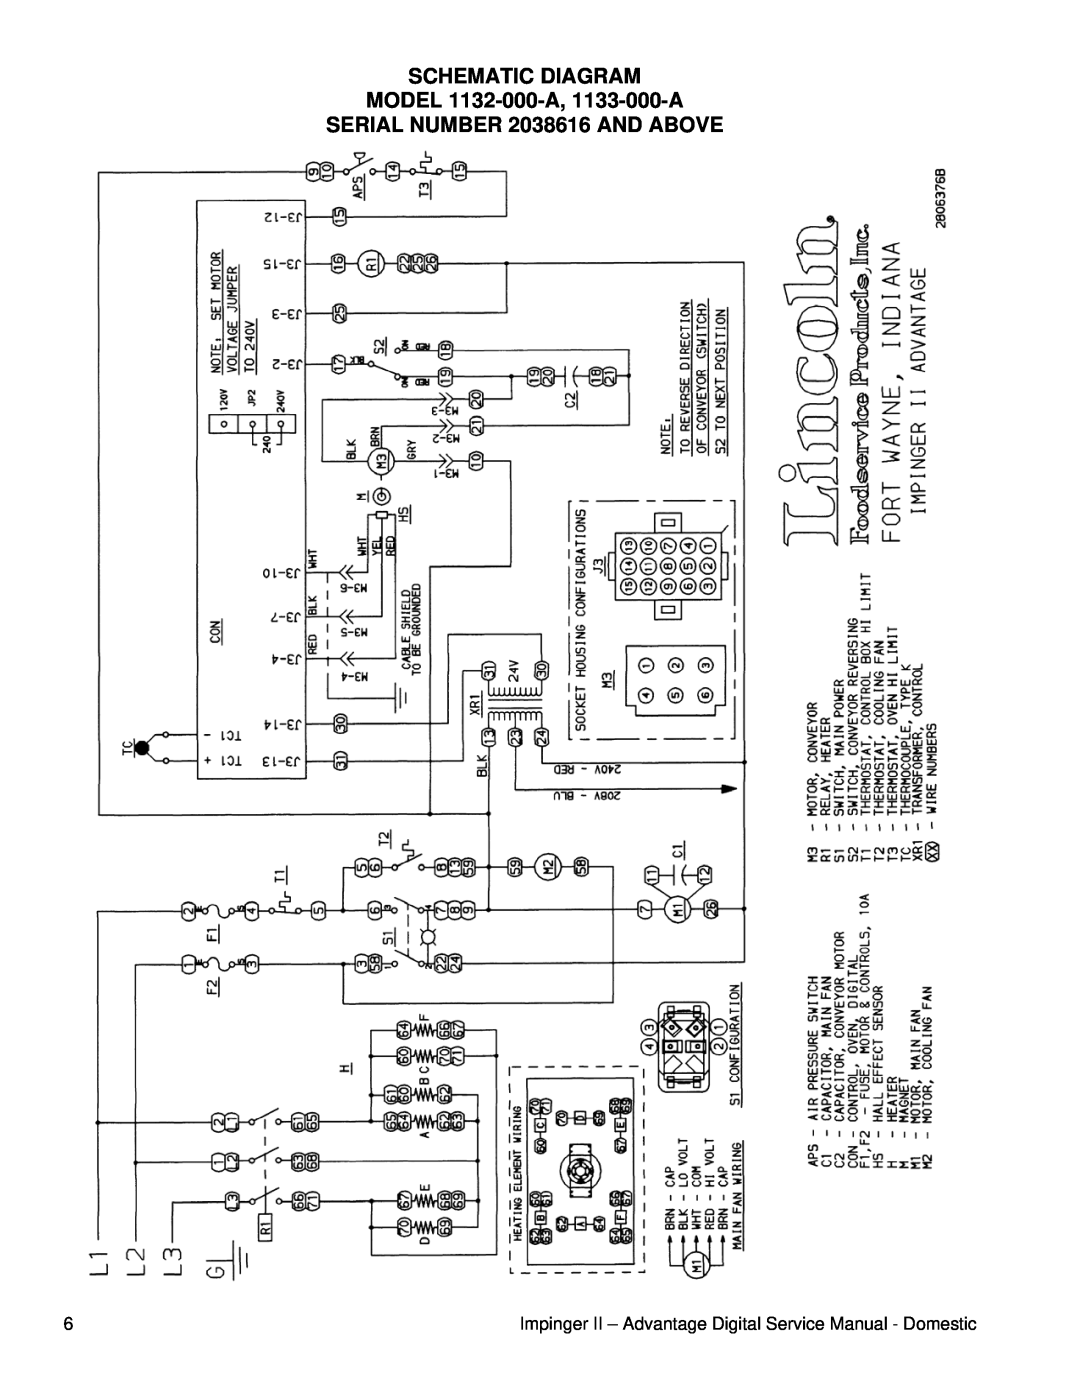 Lincoln 116-000-A, 1131-000-A SCHEMATIC DIAGRAM MODEL 1132-000-A, 1133-000-A, SERIAL NUMBER 2038616 AND ABOVE 